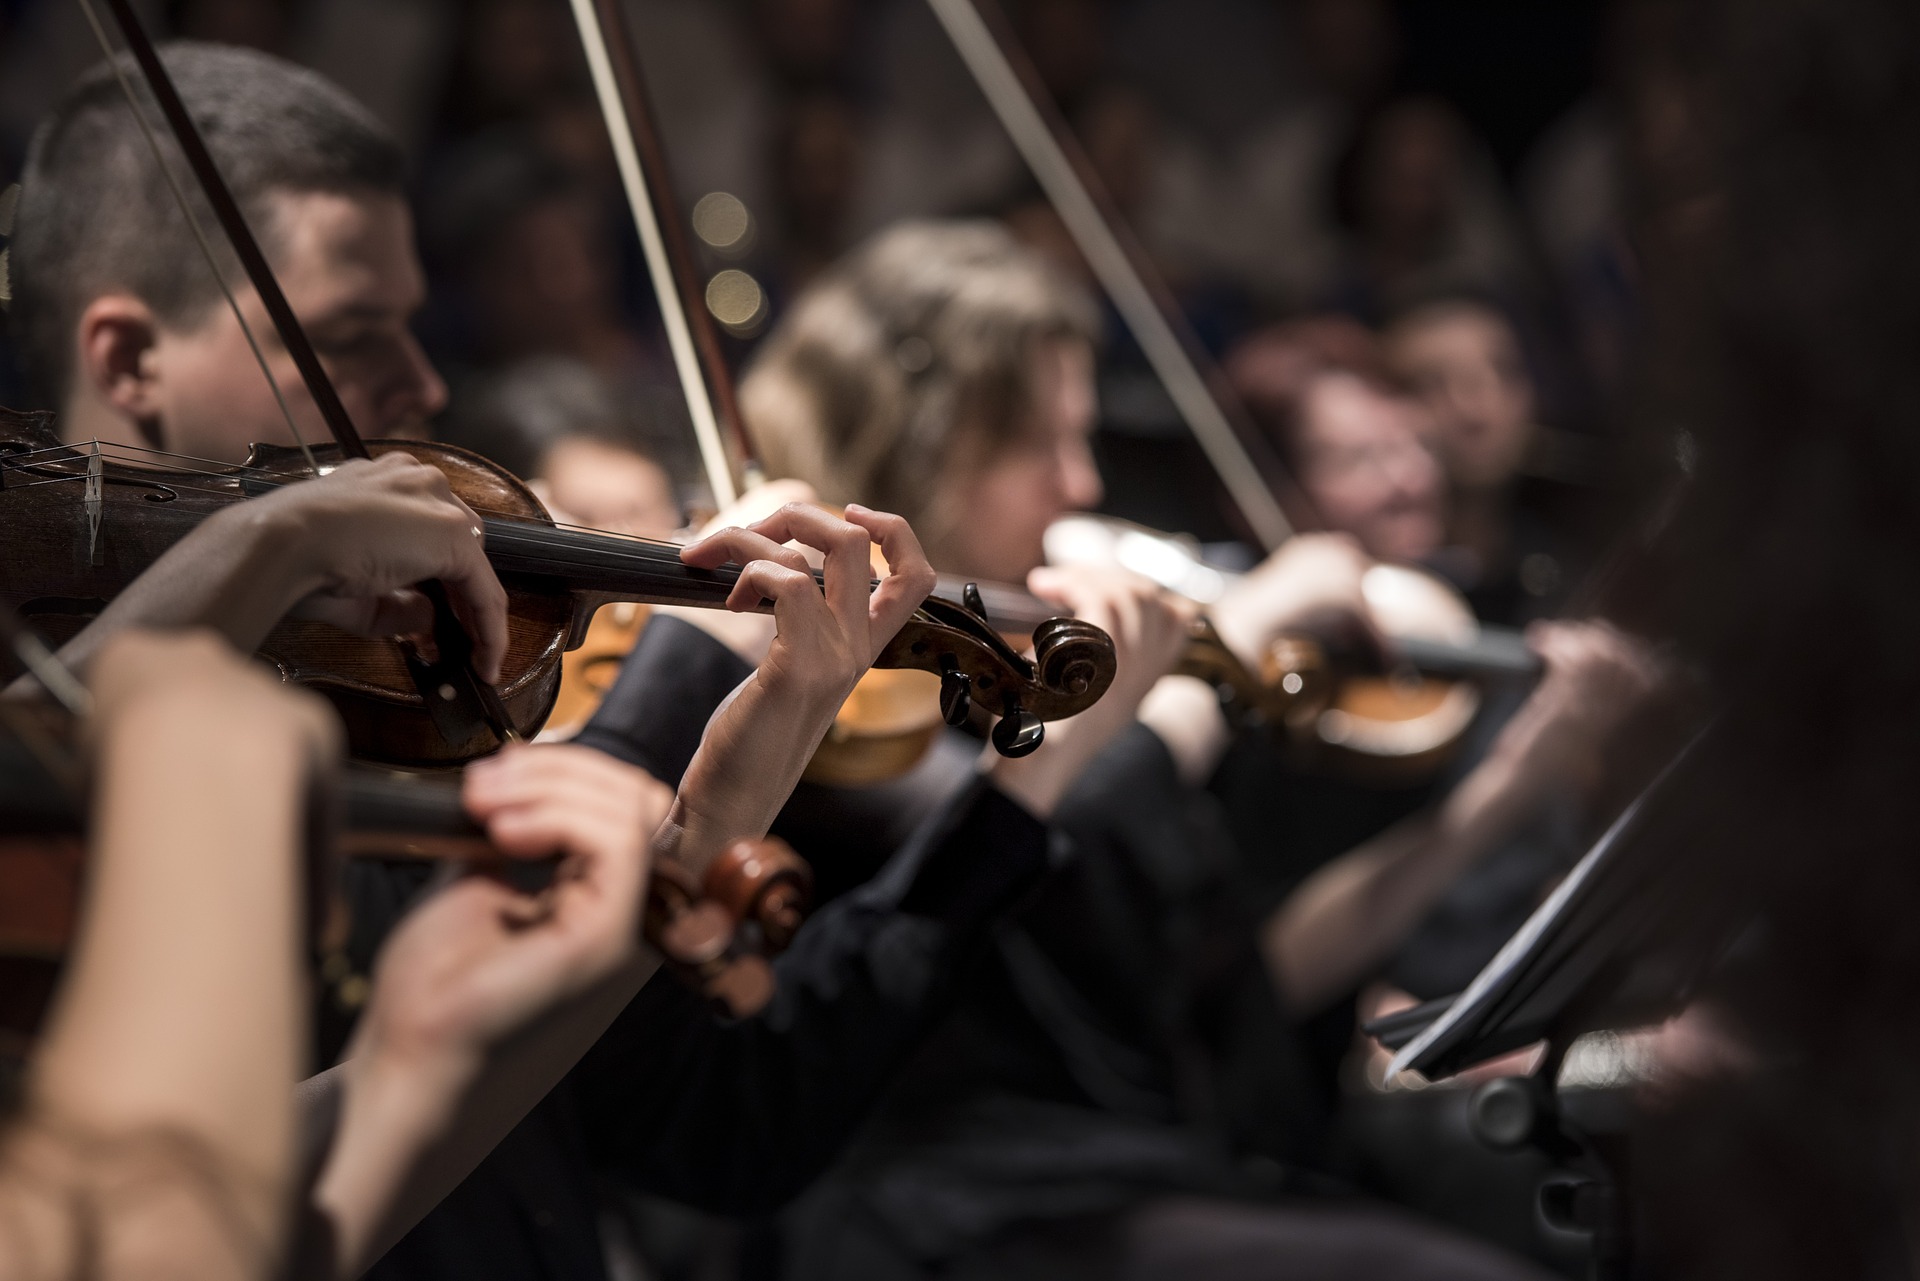 How to enjoy a classical music concert - a guide for the casual listener